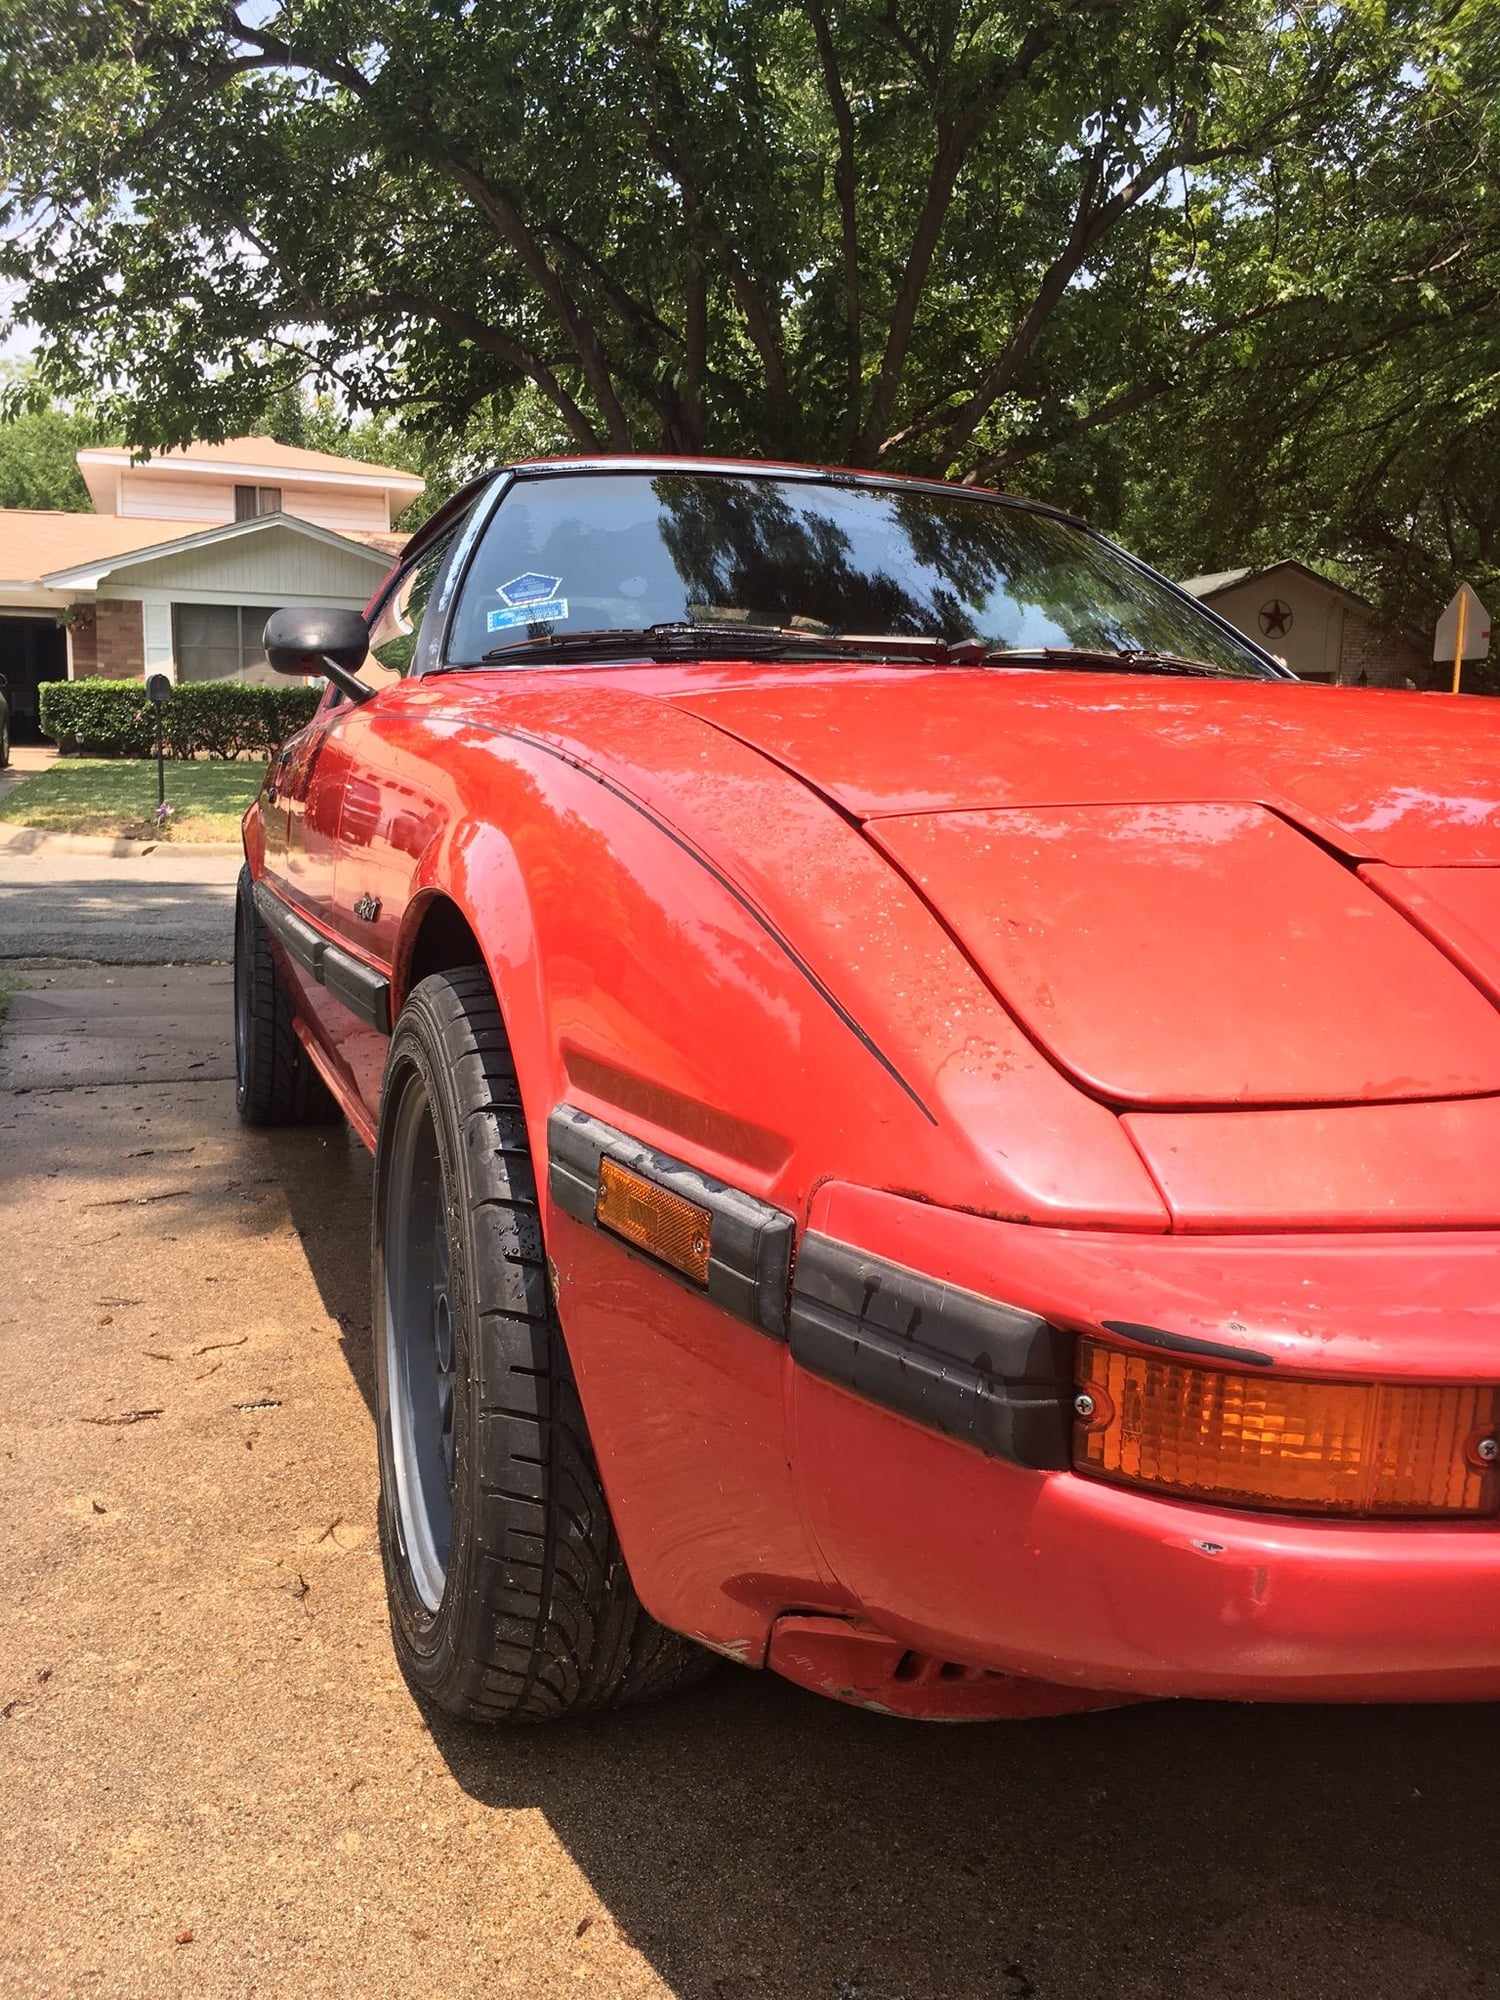 1984 Mazda RX-7 - 1984 RX-7 GSL-SE - Clean Rolling Chassis - Used - VIN JM1FB332XE0835890 - 128,000 Miles - Other - 2WD - Manual - Red - Ennis, TX 75119, United States